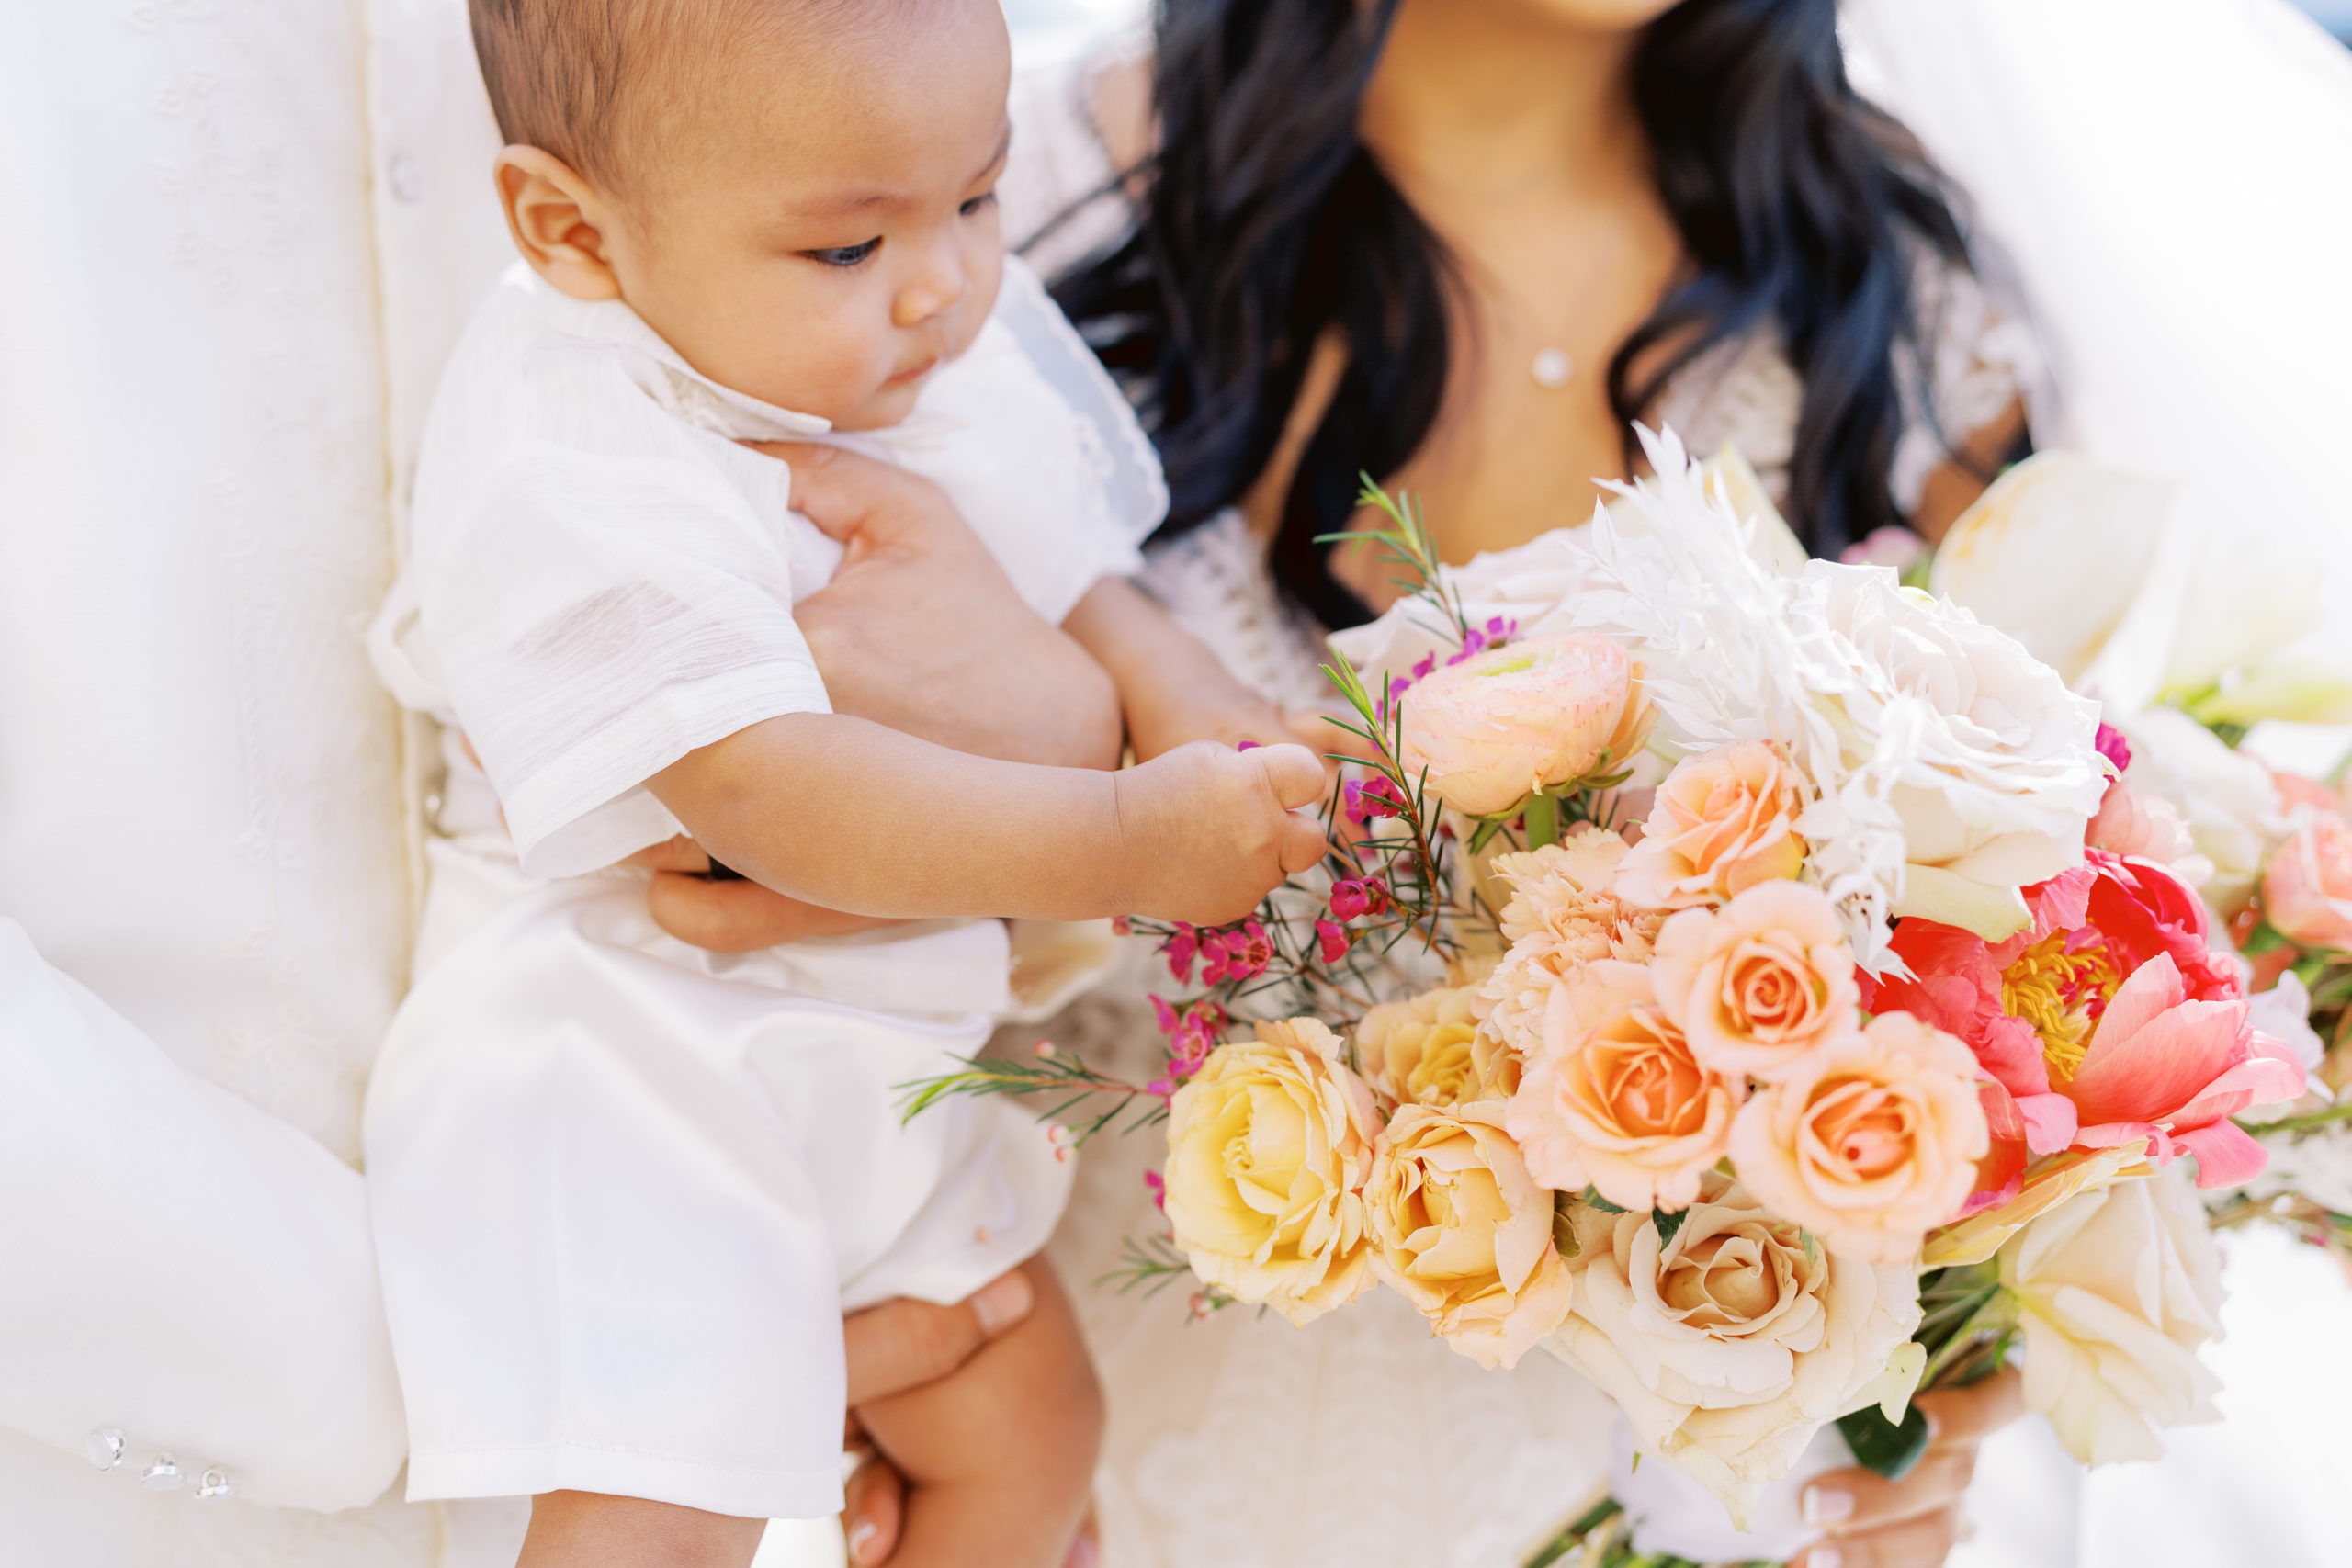 baby plays with bridal bouquet